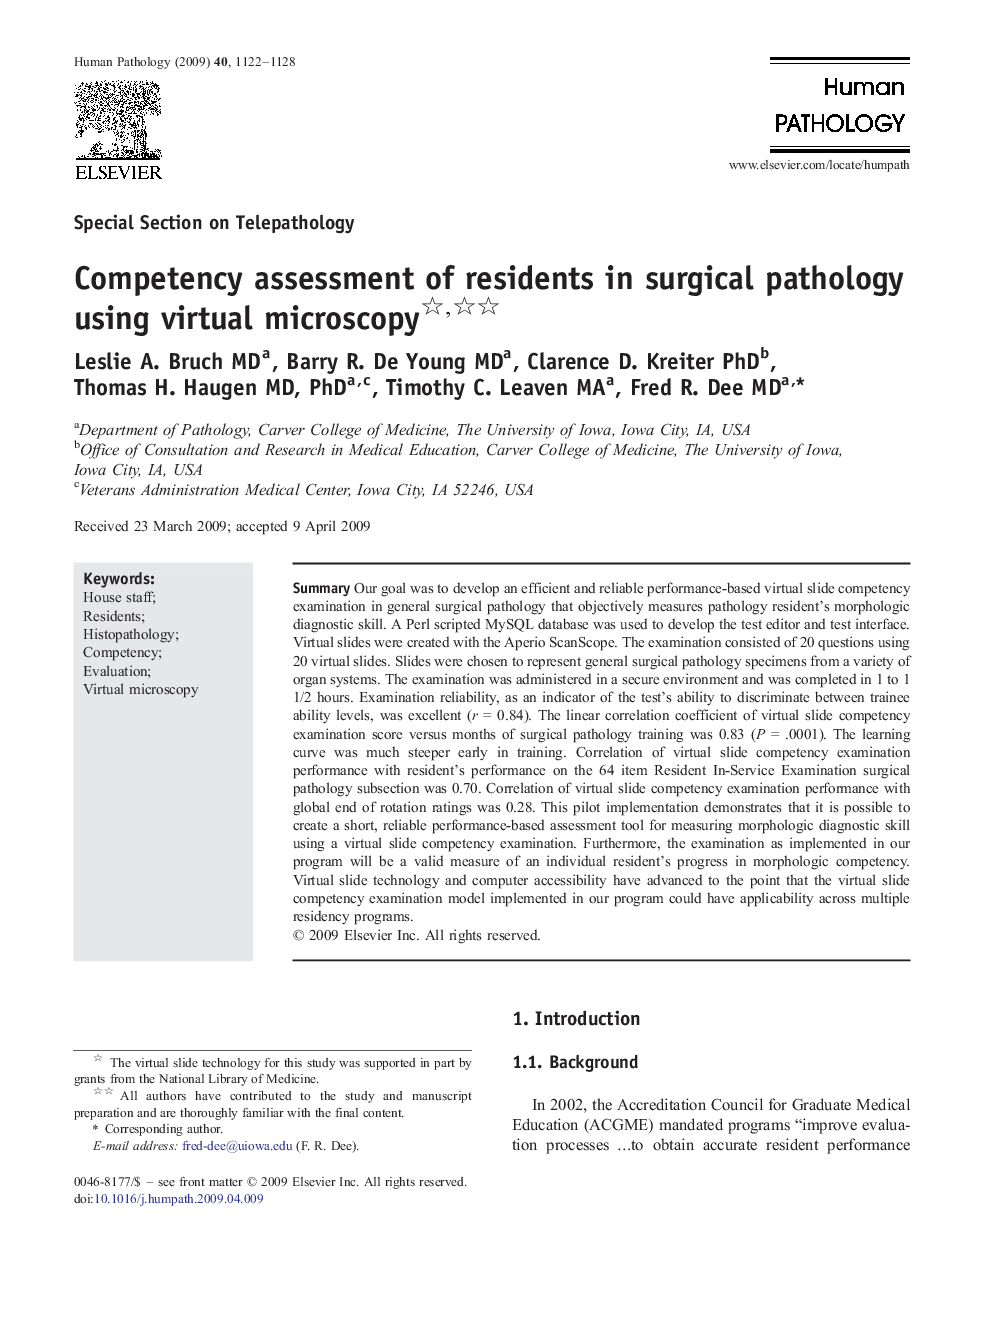 Competency assessment of residents in surgical pathology using virtual microscopy 